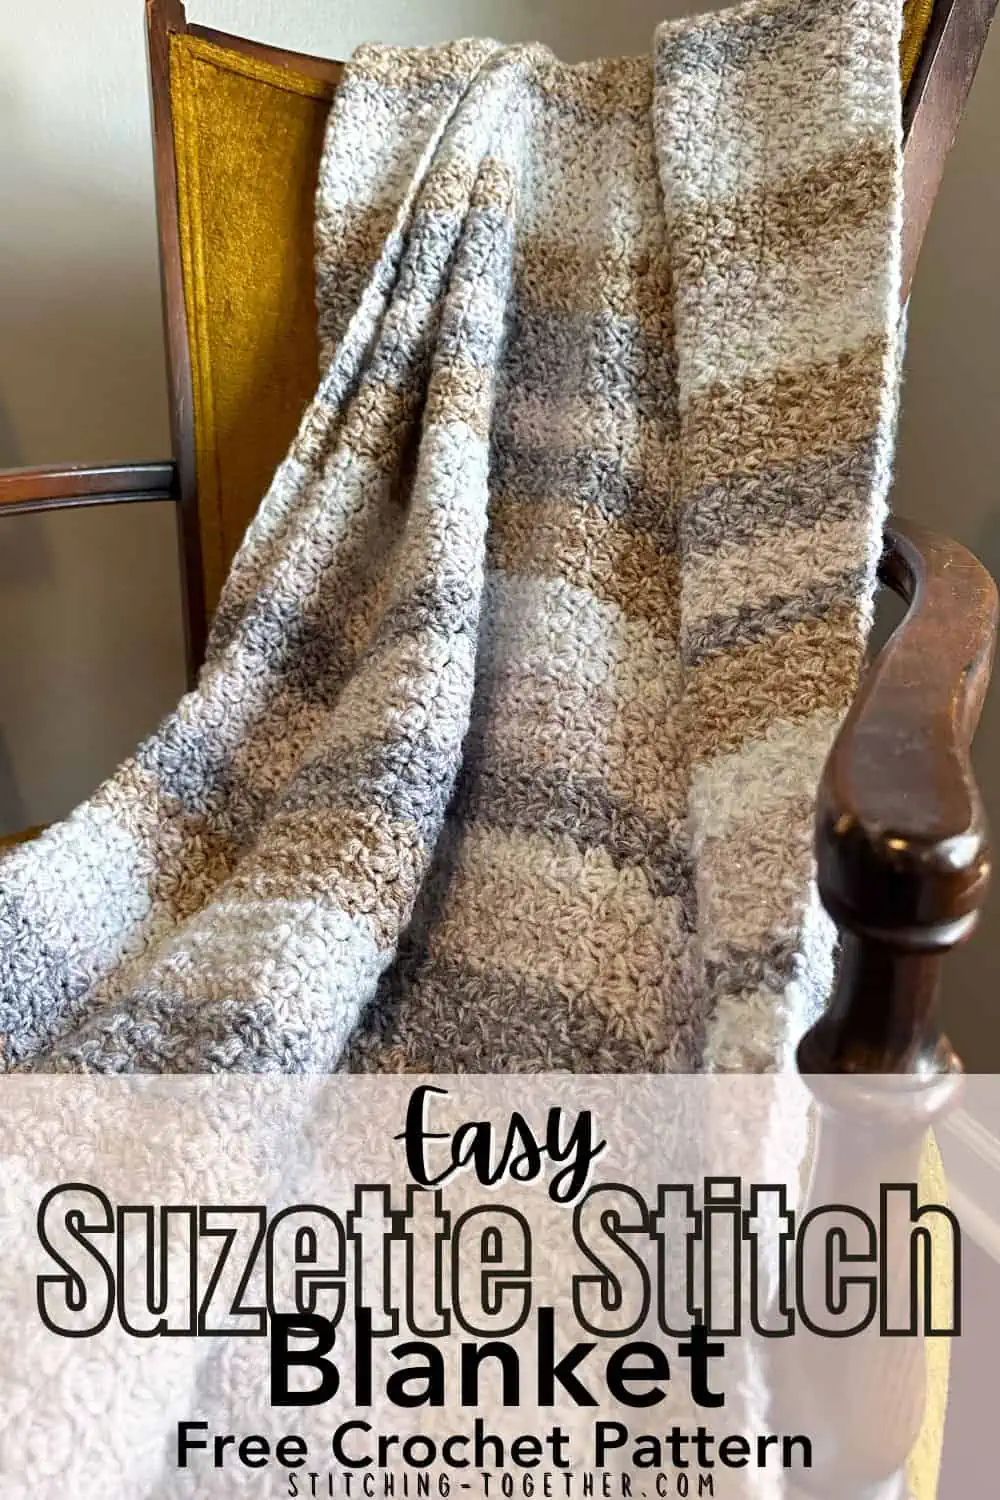 striped crochet blanket draped on a yellow chair with text overlay reading "easy suzette stitch blanket free crochet pattern"